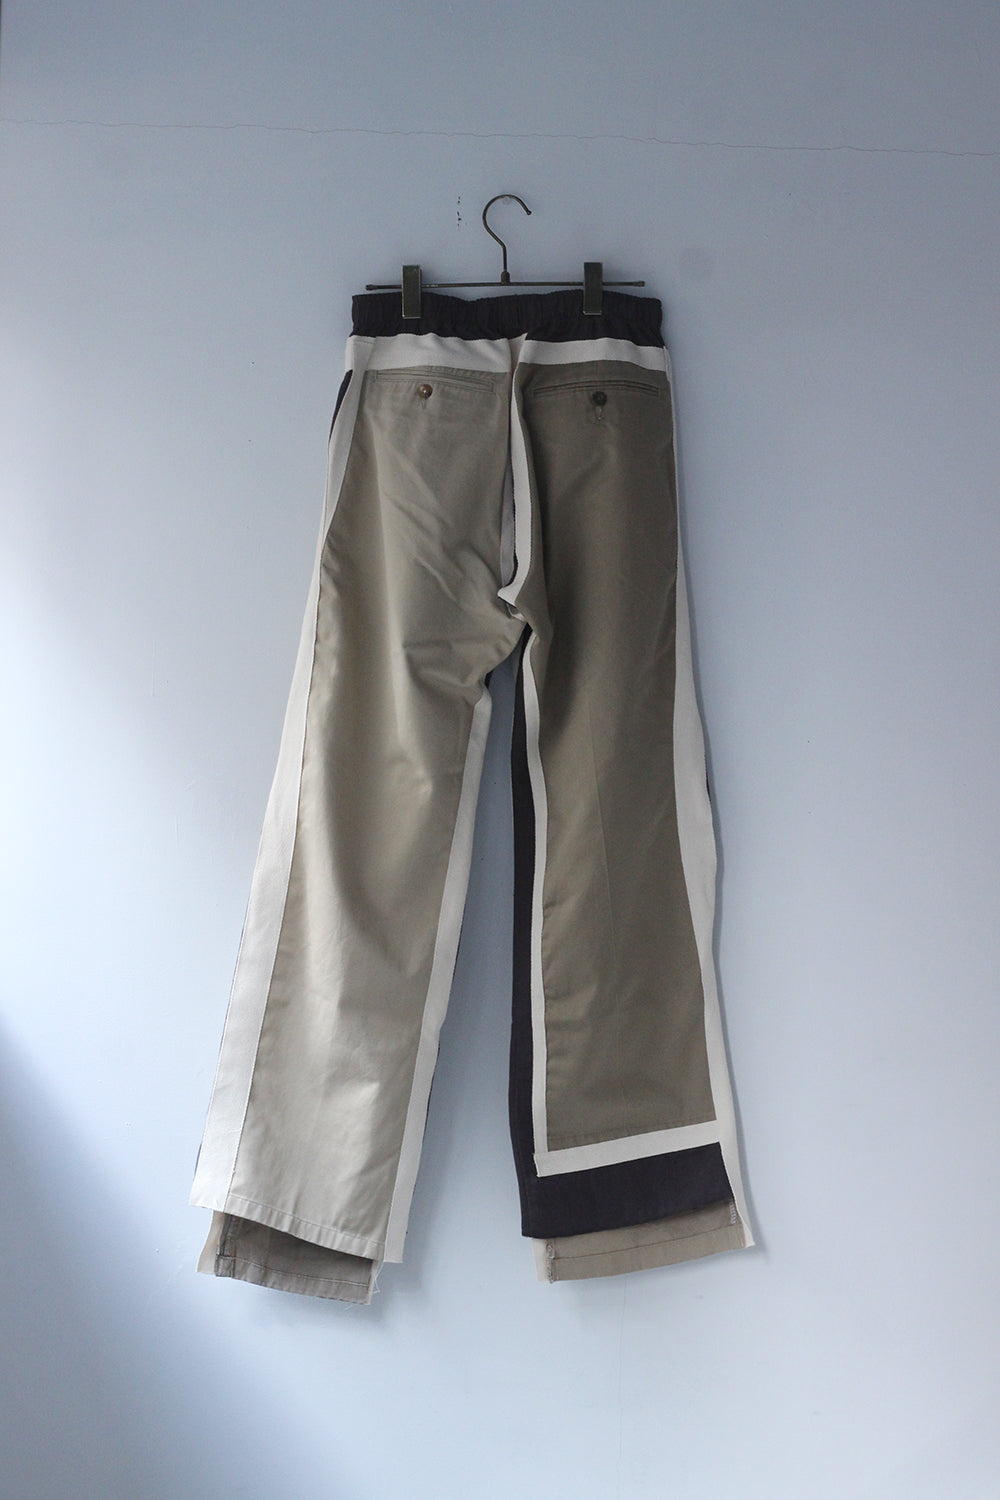 Rebuild by Needles "Chino Pant -> Covered Pant" (charcoal) 1